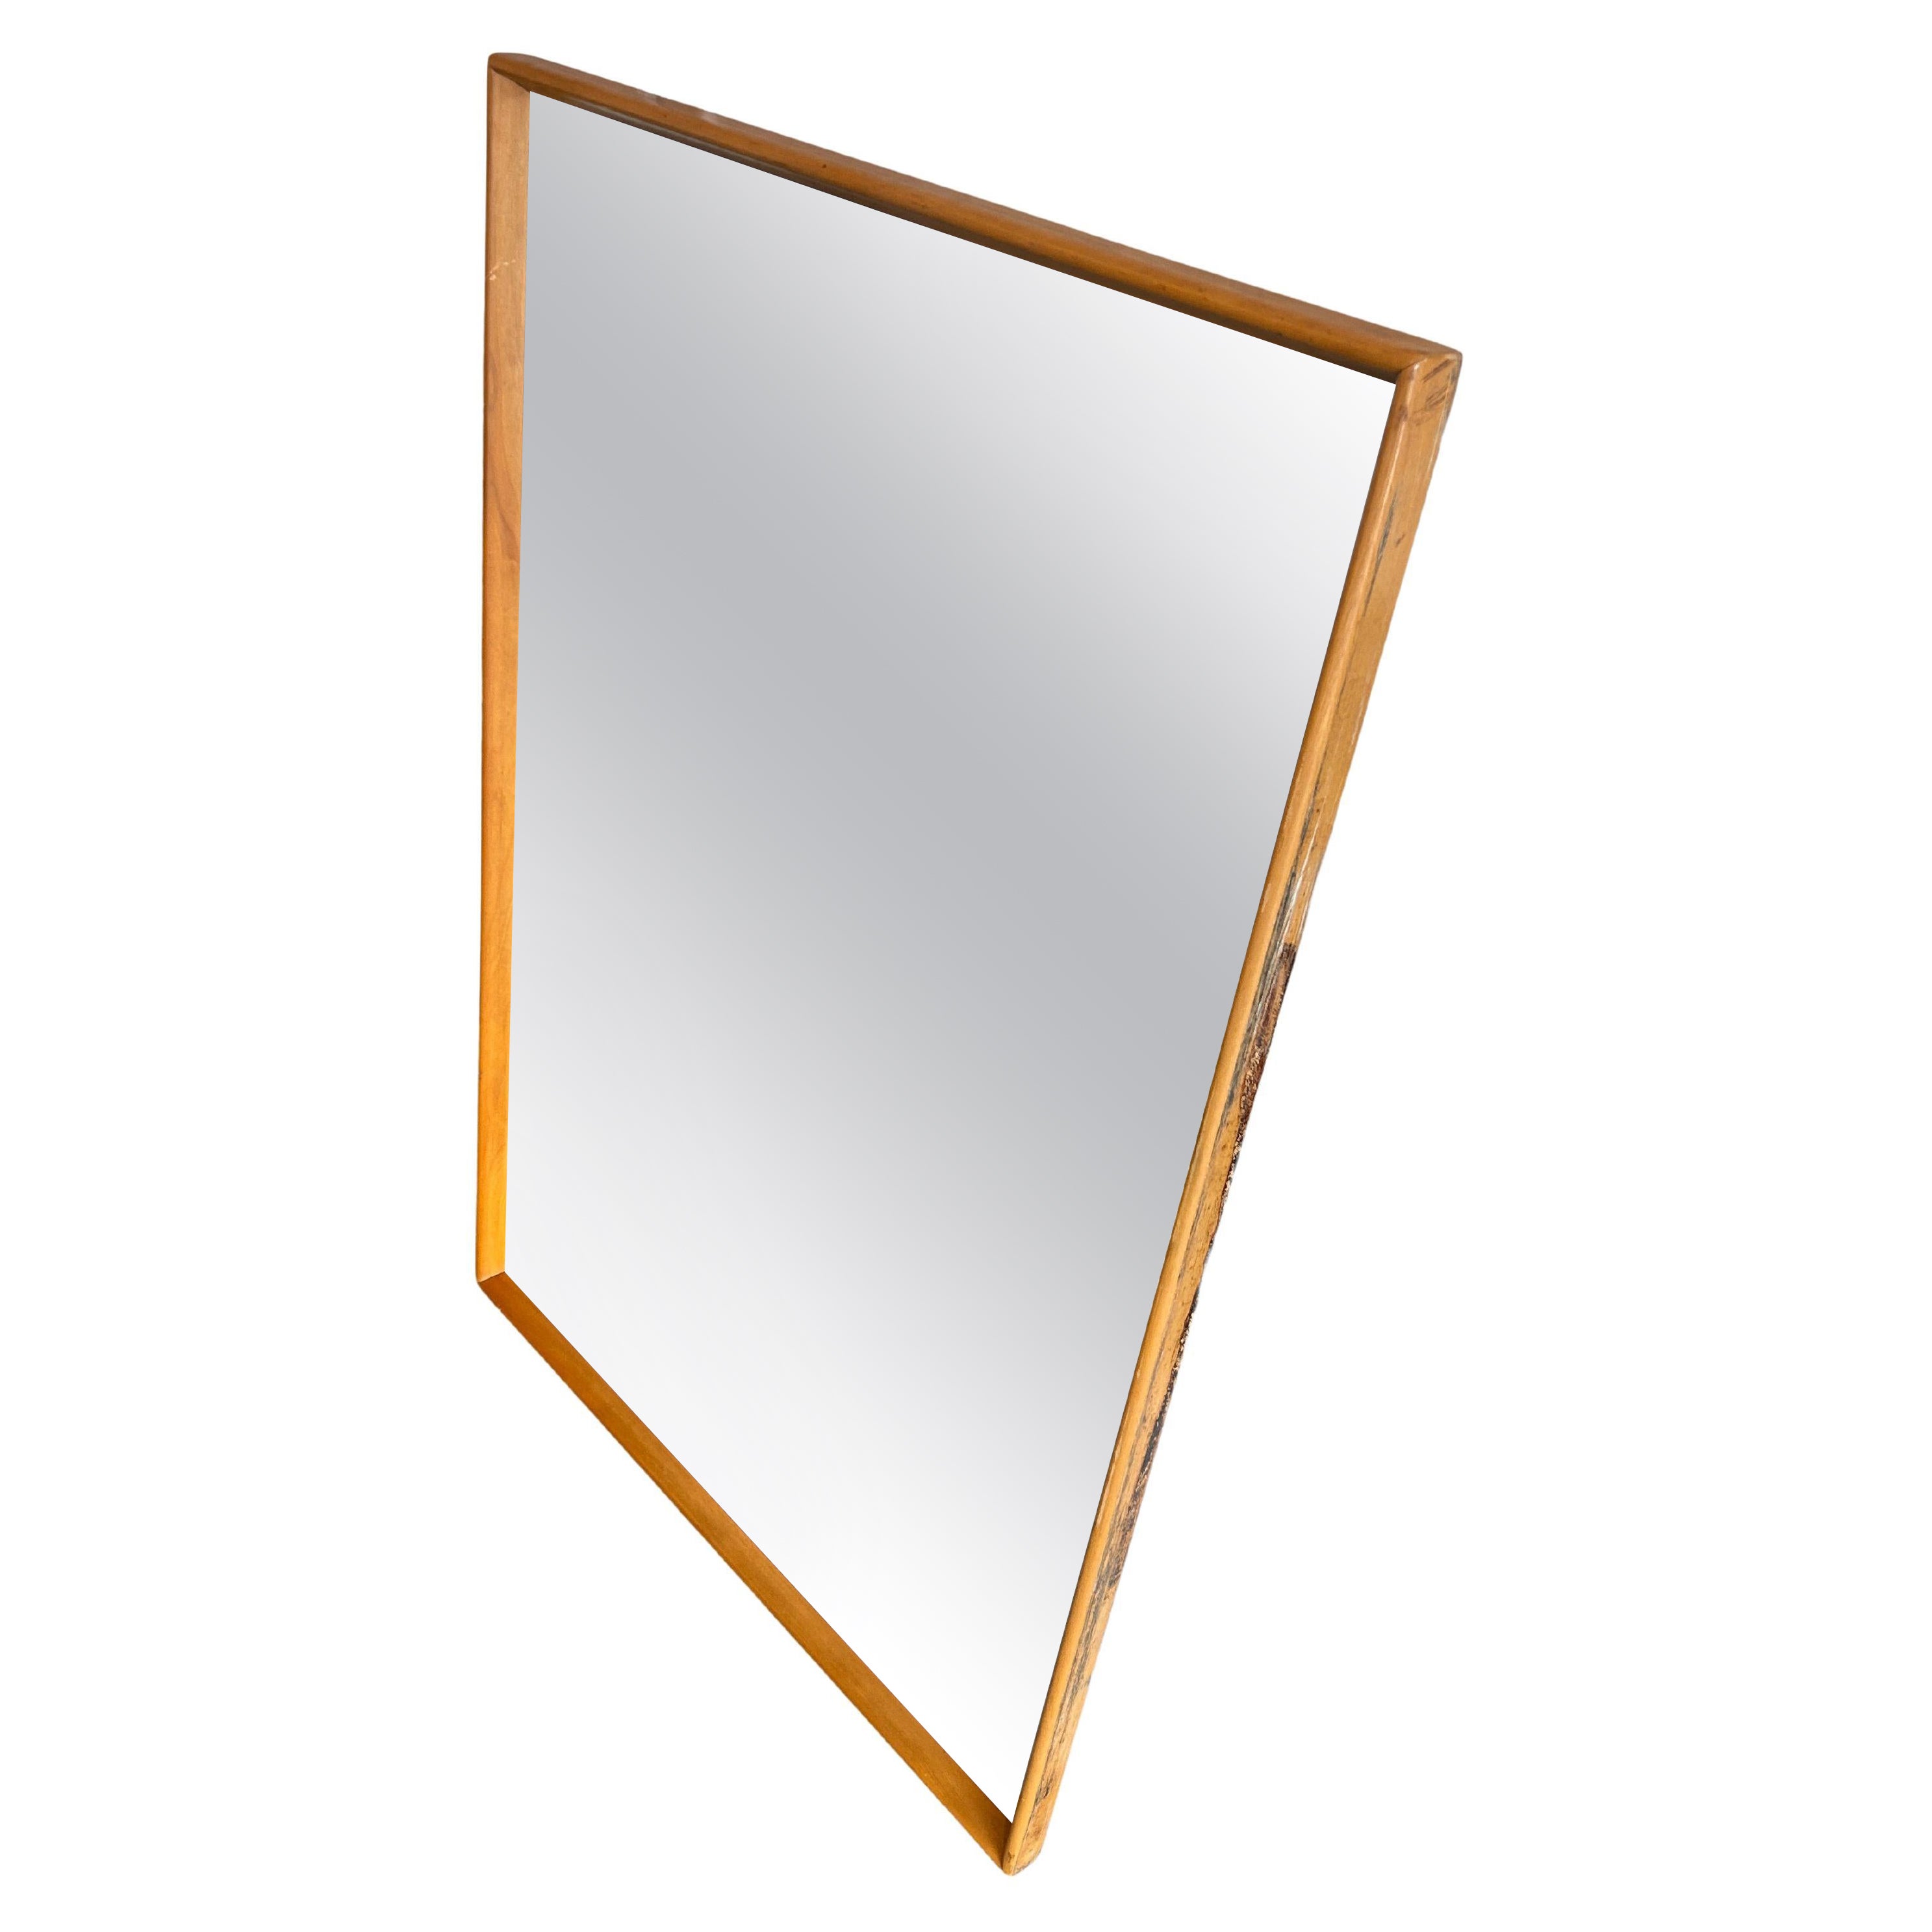 Midcentury Solid Blonde Maple Sculptured Wall Mirror by Heywood Wakefield For Sale